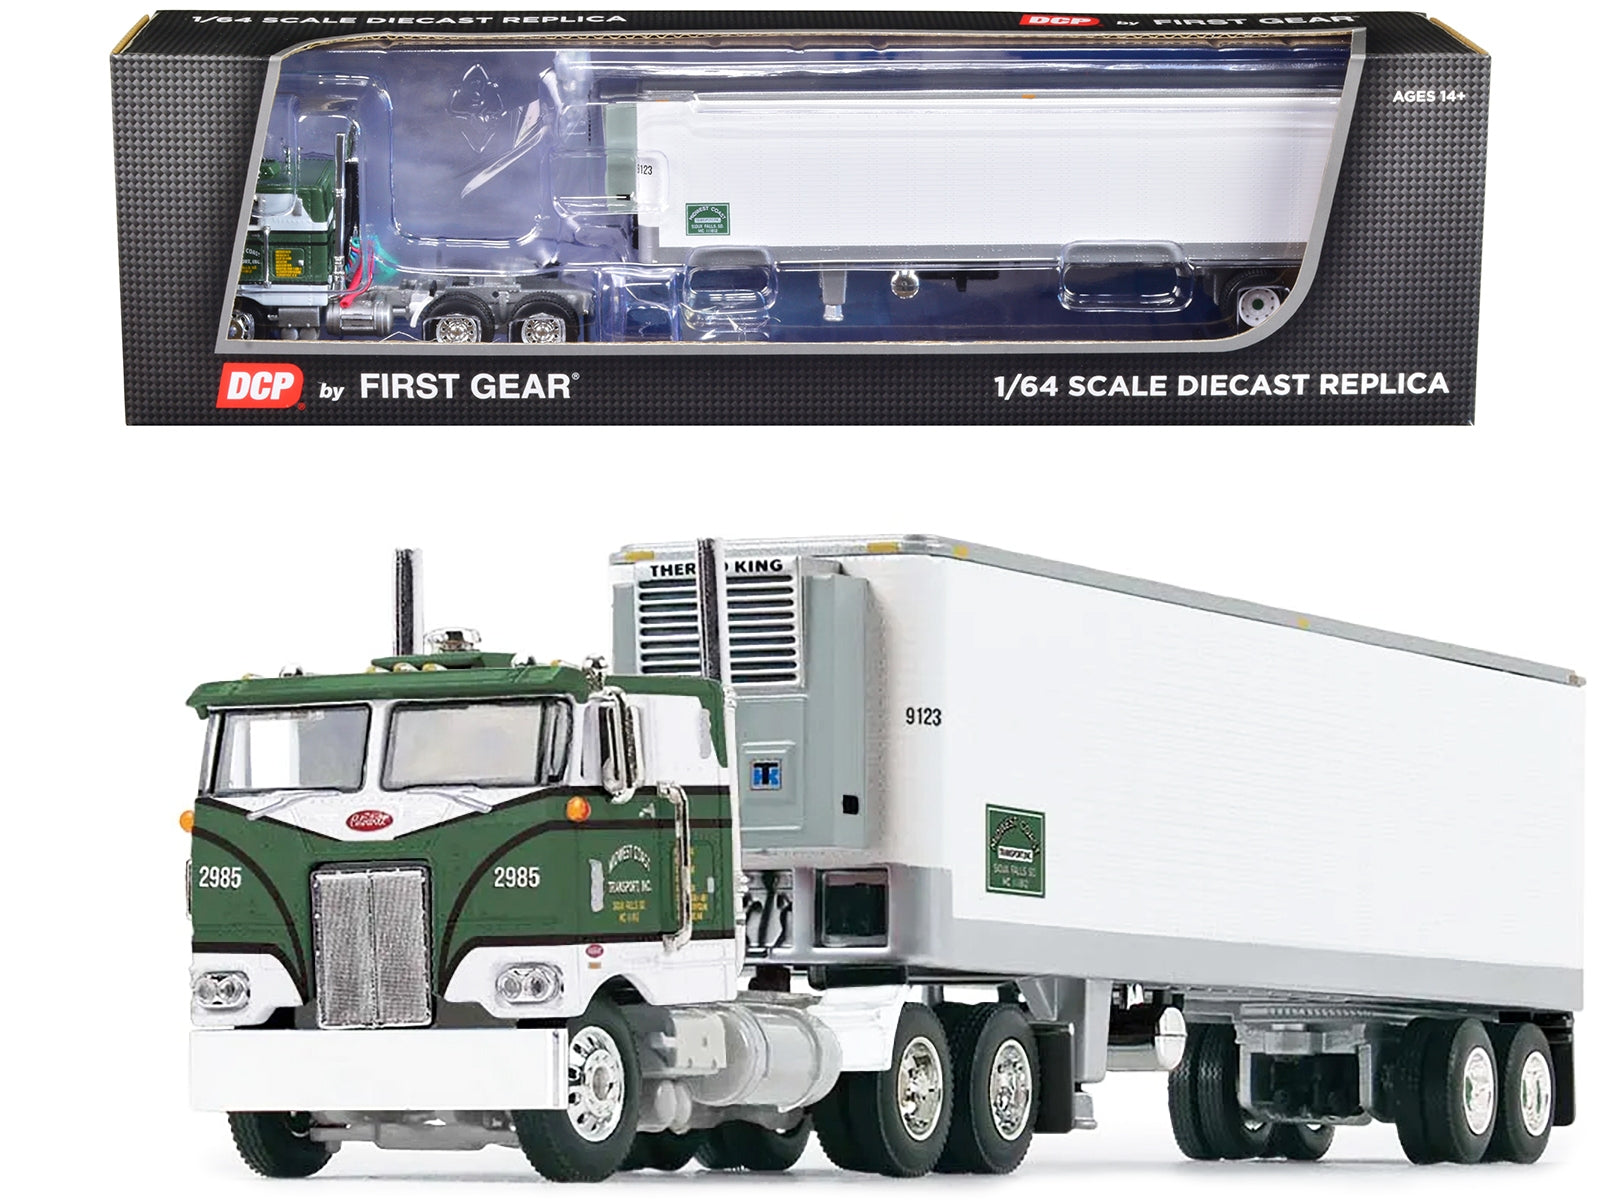 Peterbilt 352 COE 86" Sleeper and 40' Vintage Refrigerated Trailer Green with Graphics "Midwest Coast Transport" "Fallen Flag" Series 1/64 Diecast Model by DCP/First Gear